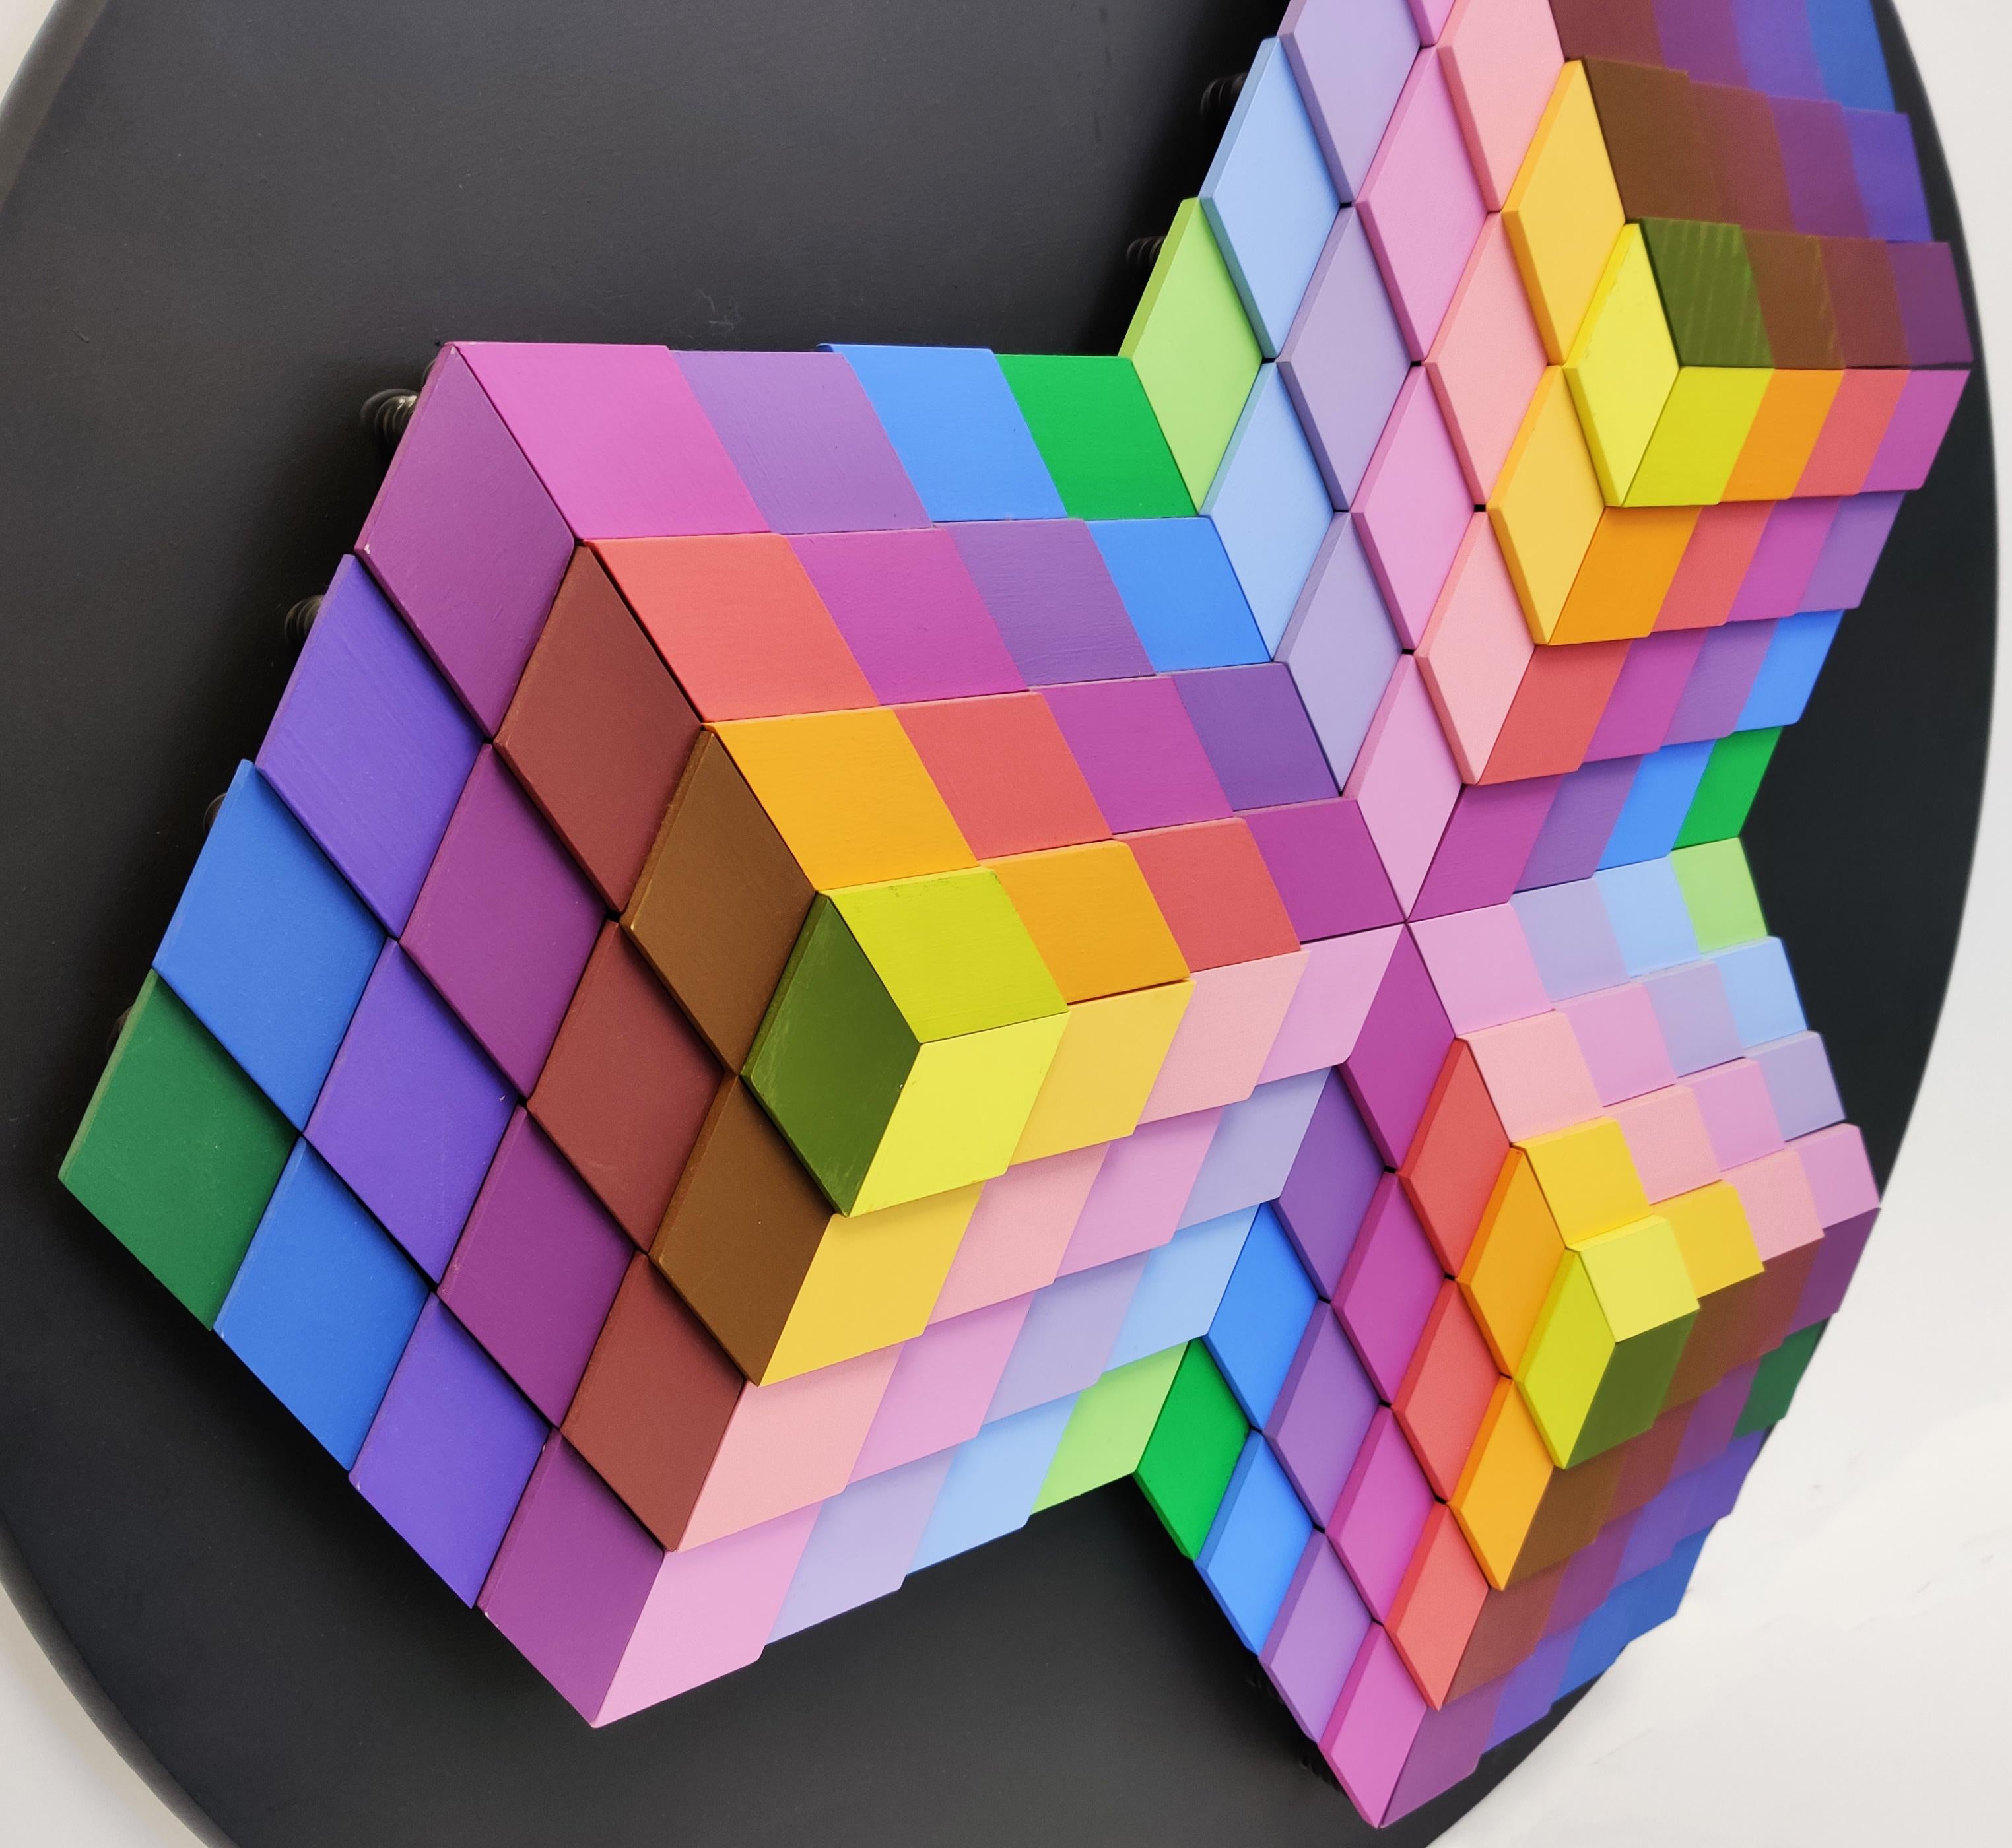 CUBED STAR (DIMENSIONAL PIECES OF WOOD WITH MAGNETS) - Op Art Painting by Stan Slutsky